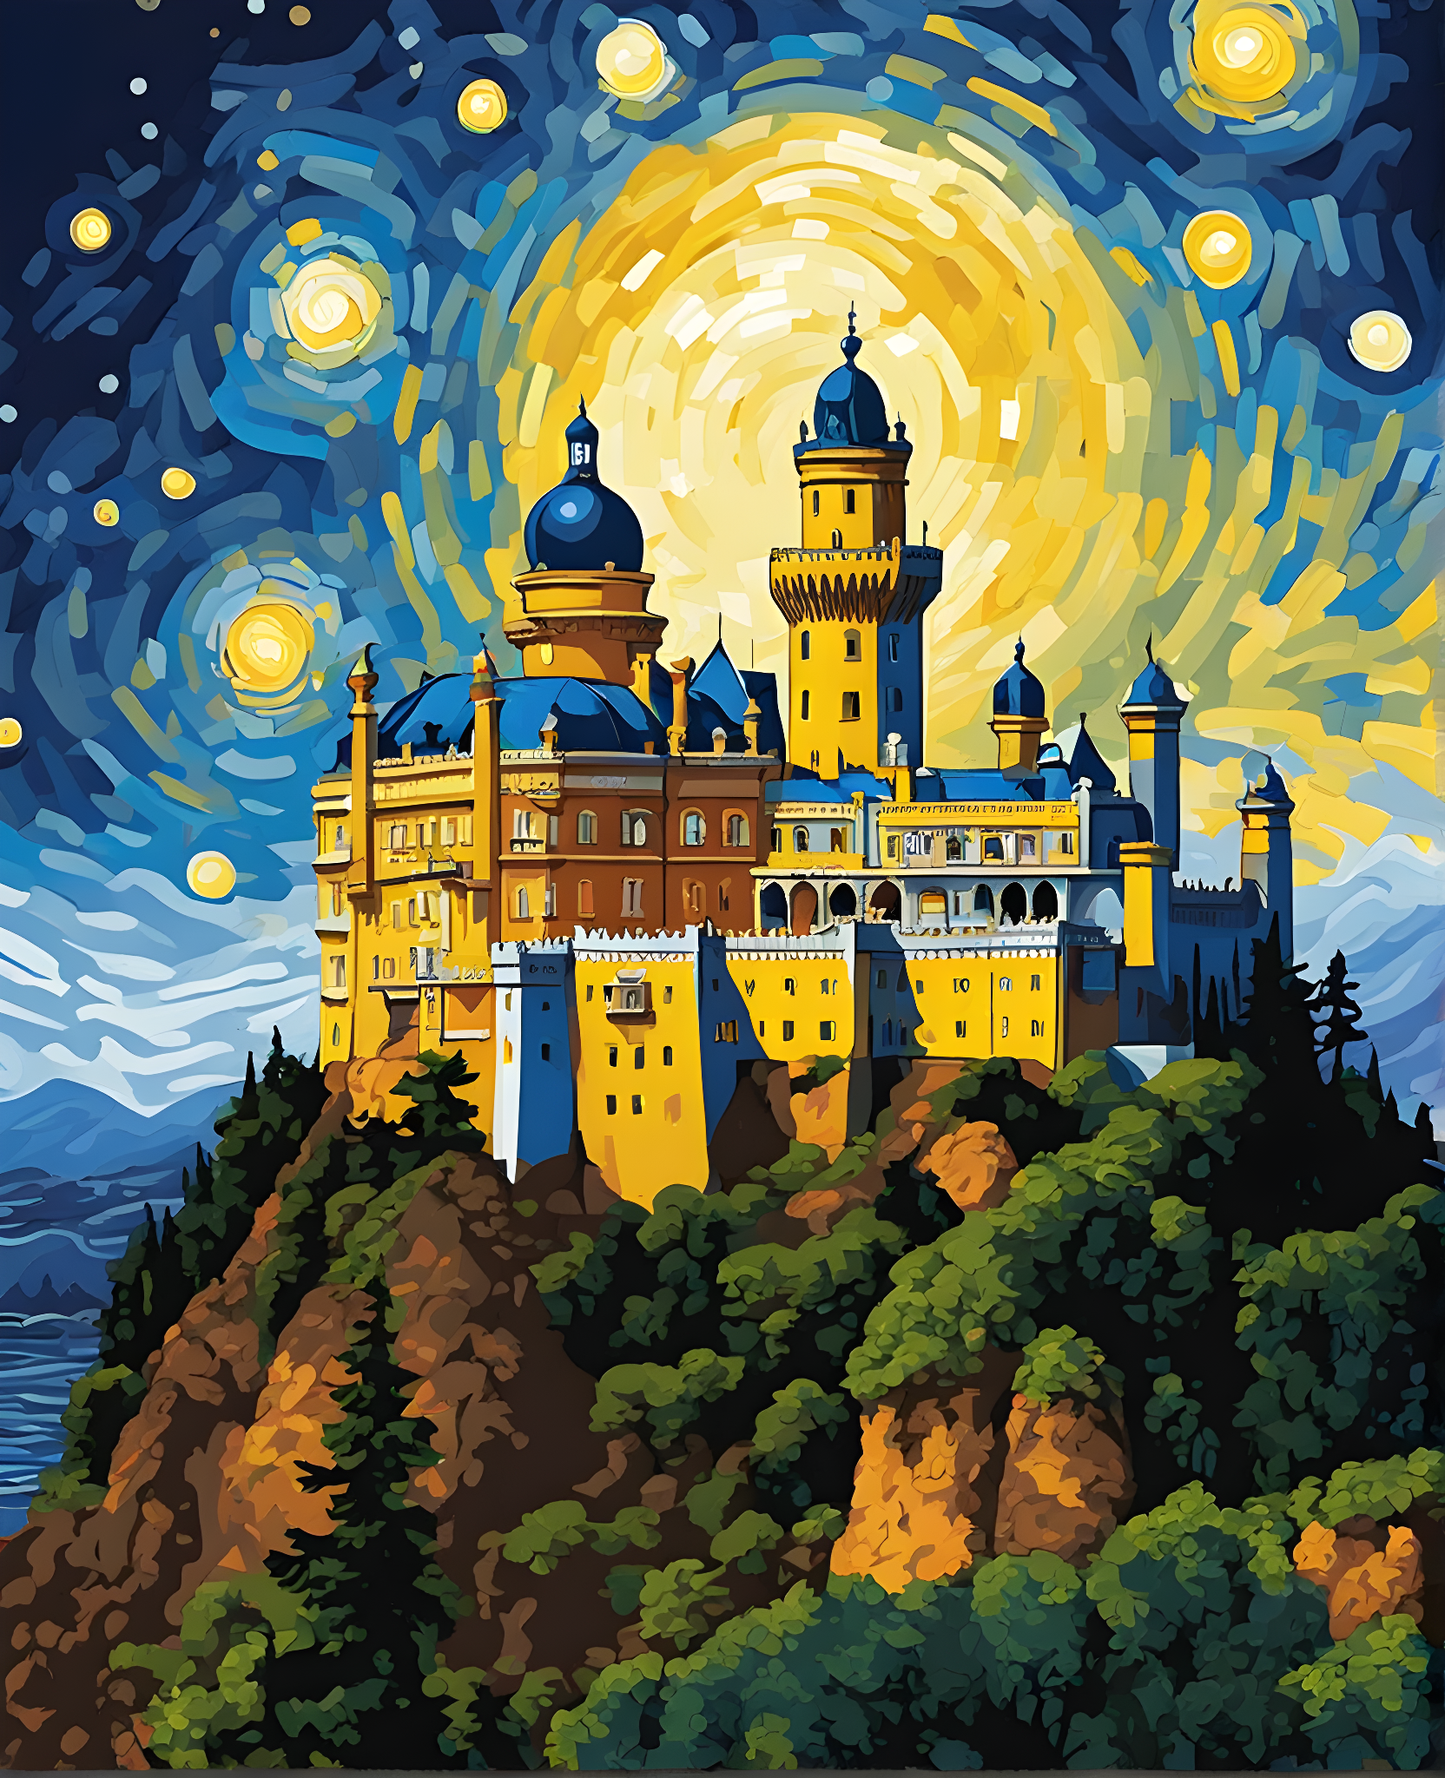 Castles OD - Pena Palace, Portugal (10) - Van-Go Paint-By-Number Kit